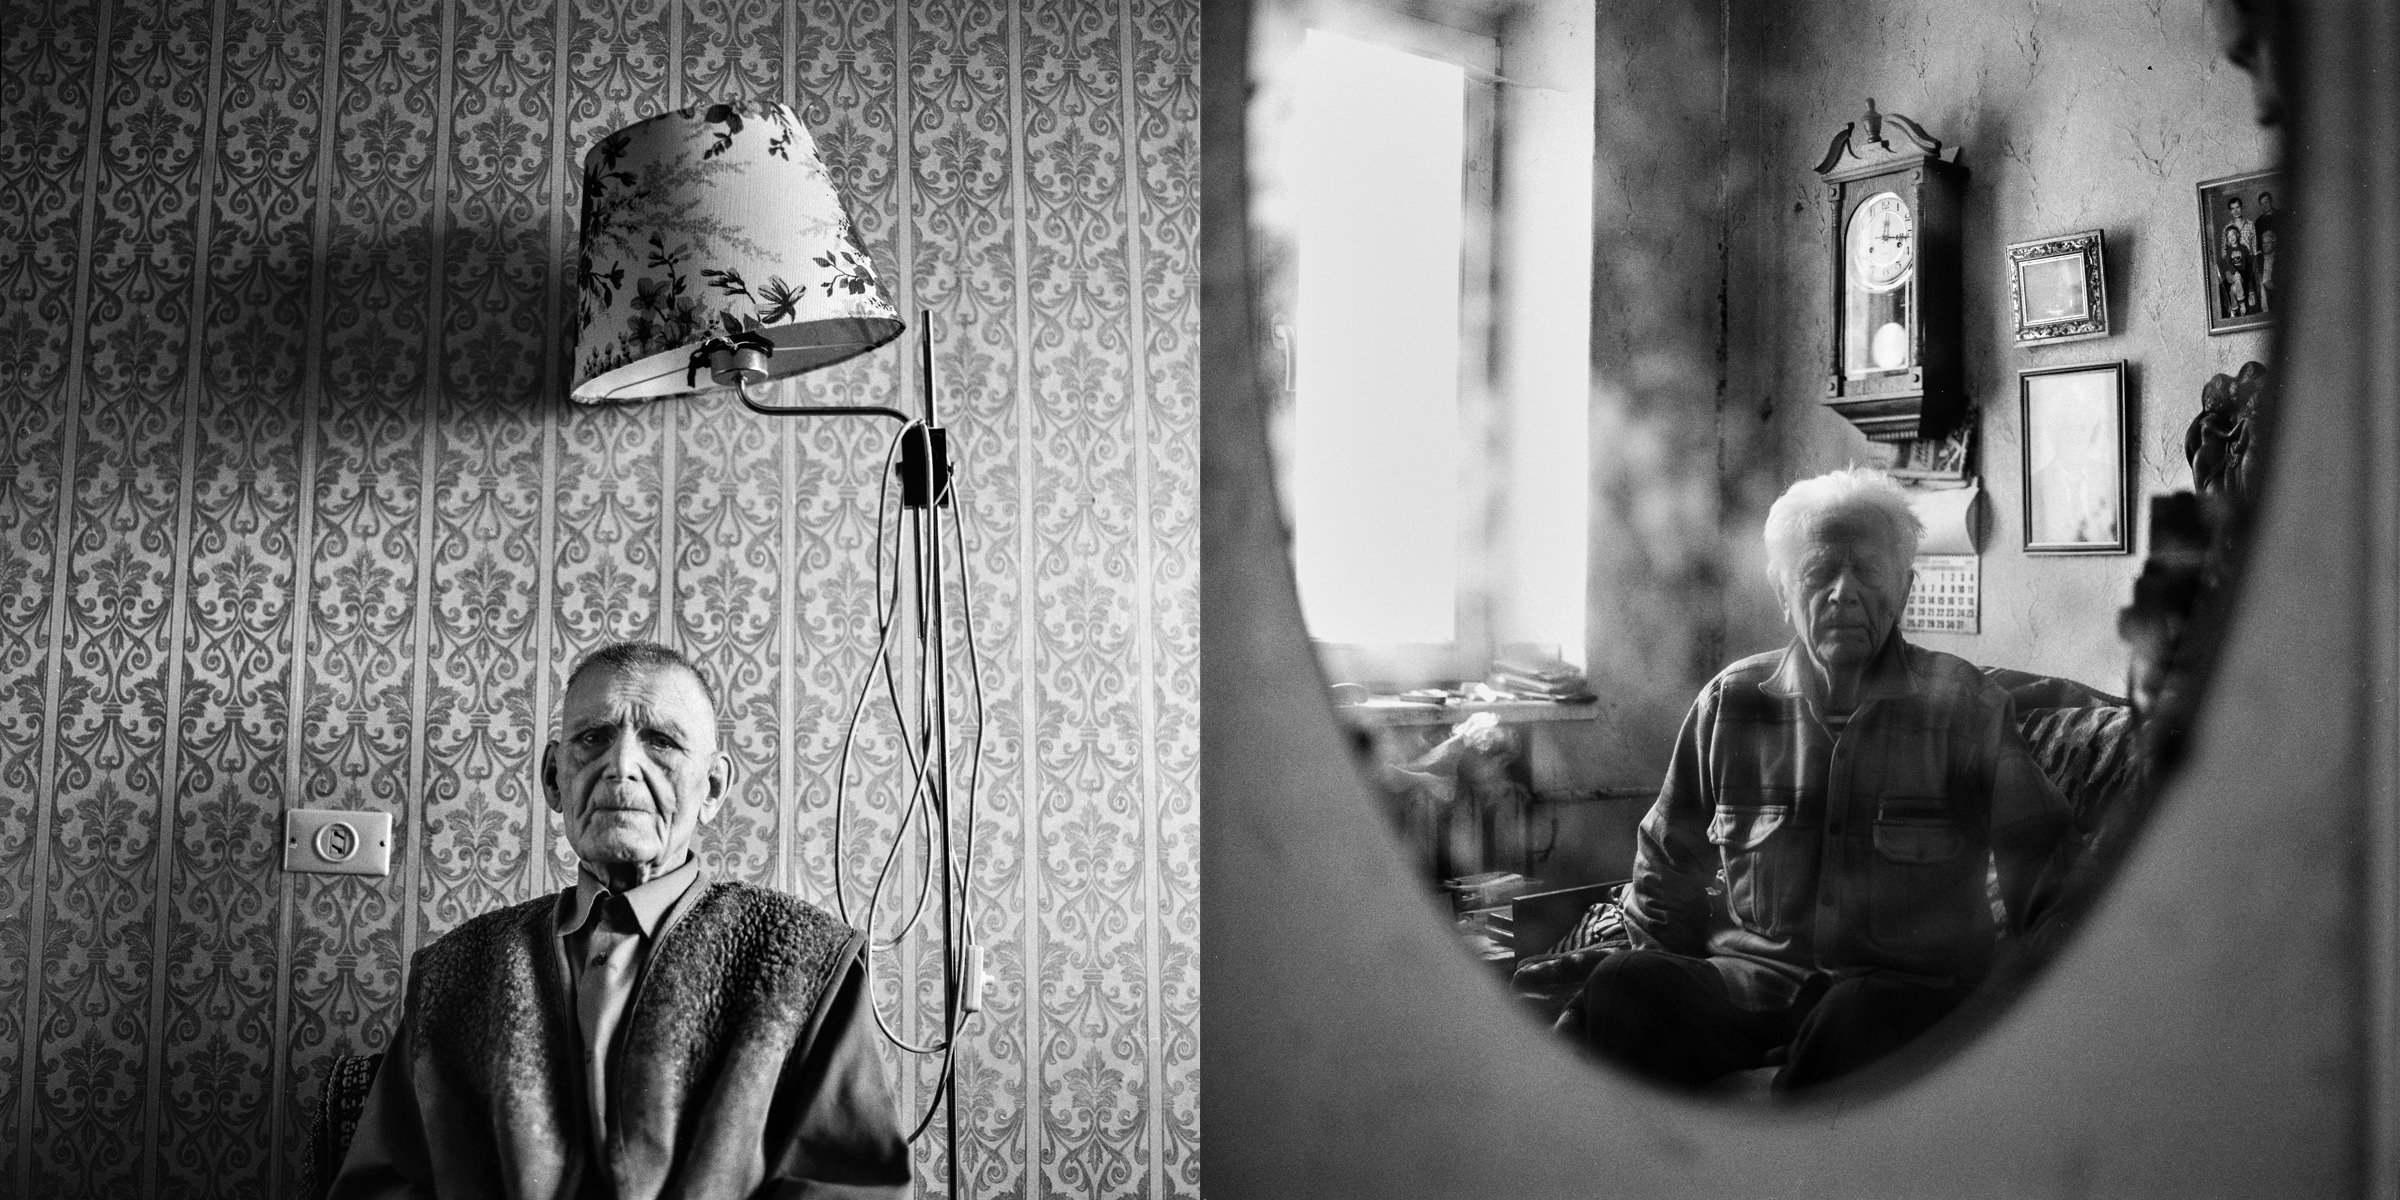 Belarusian veterans portraits of WW 2 sitting in their flats in Minsk, documentary black-and-white photo project